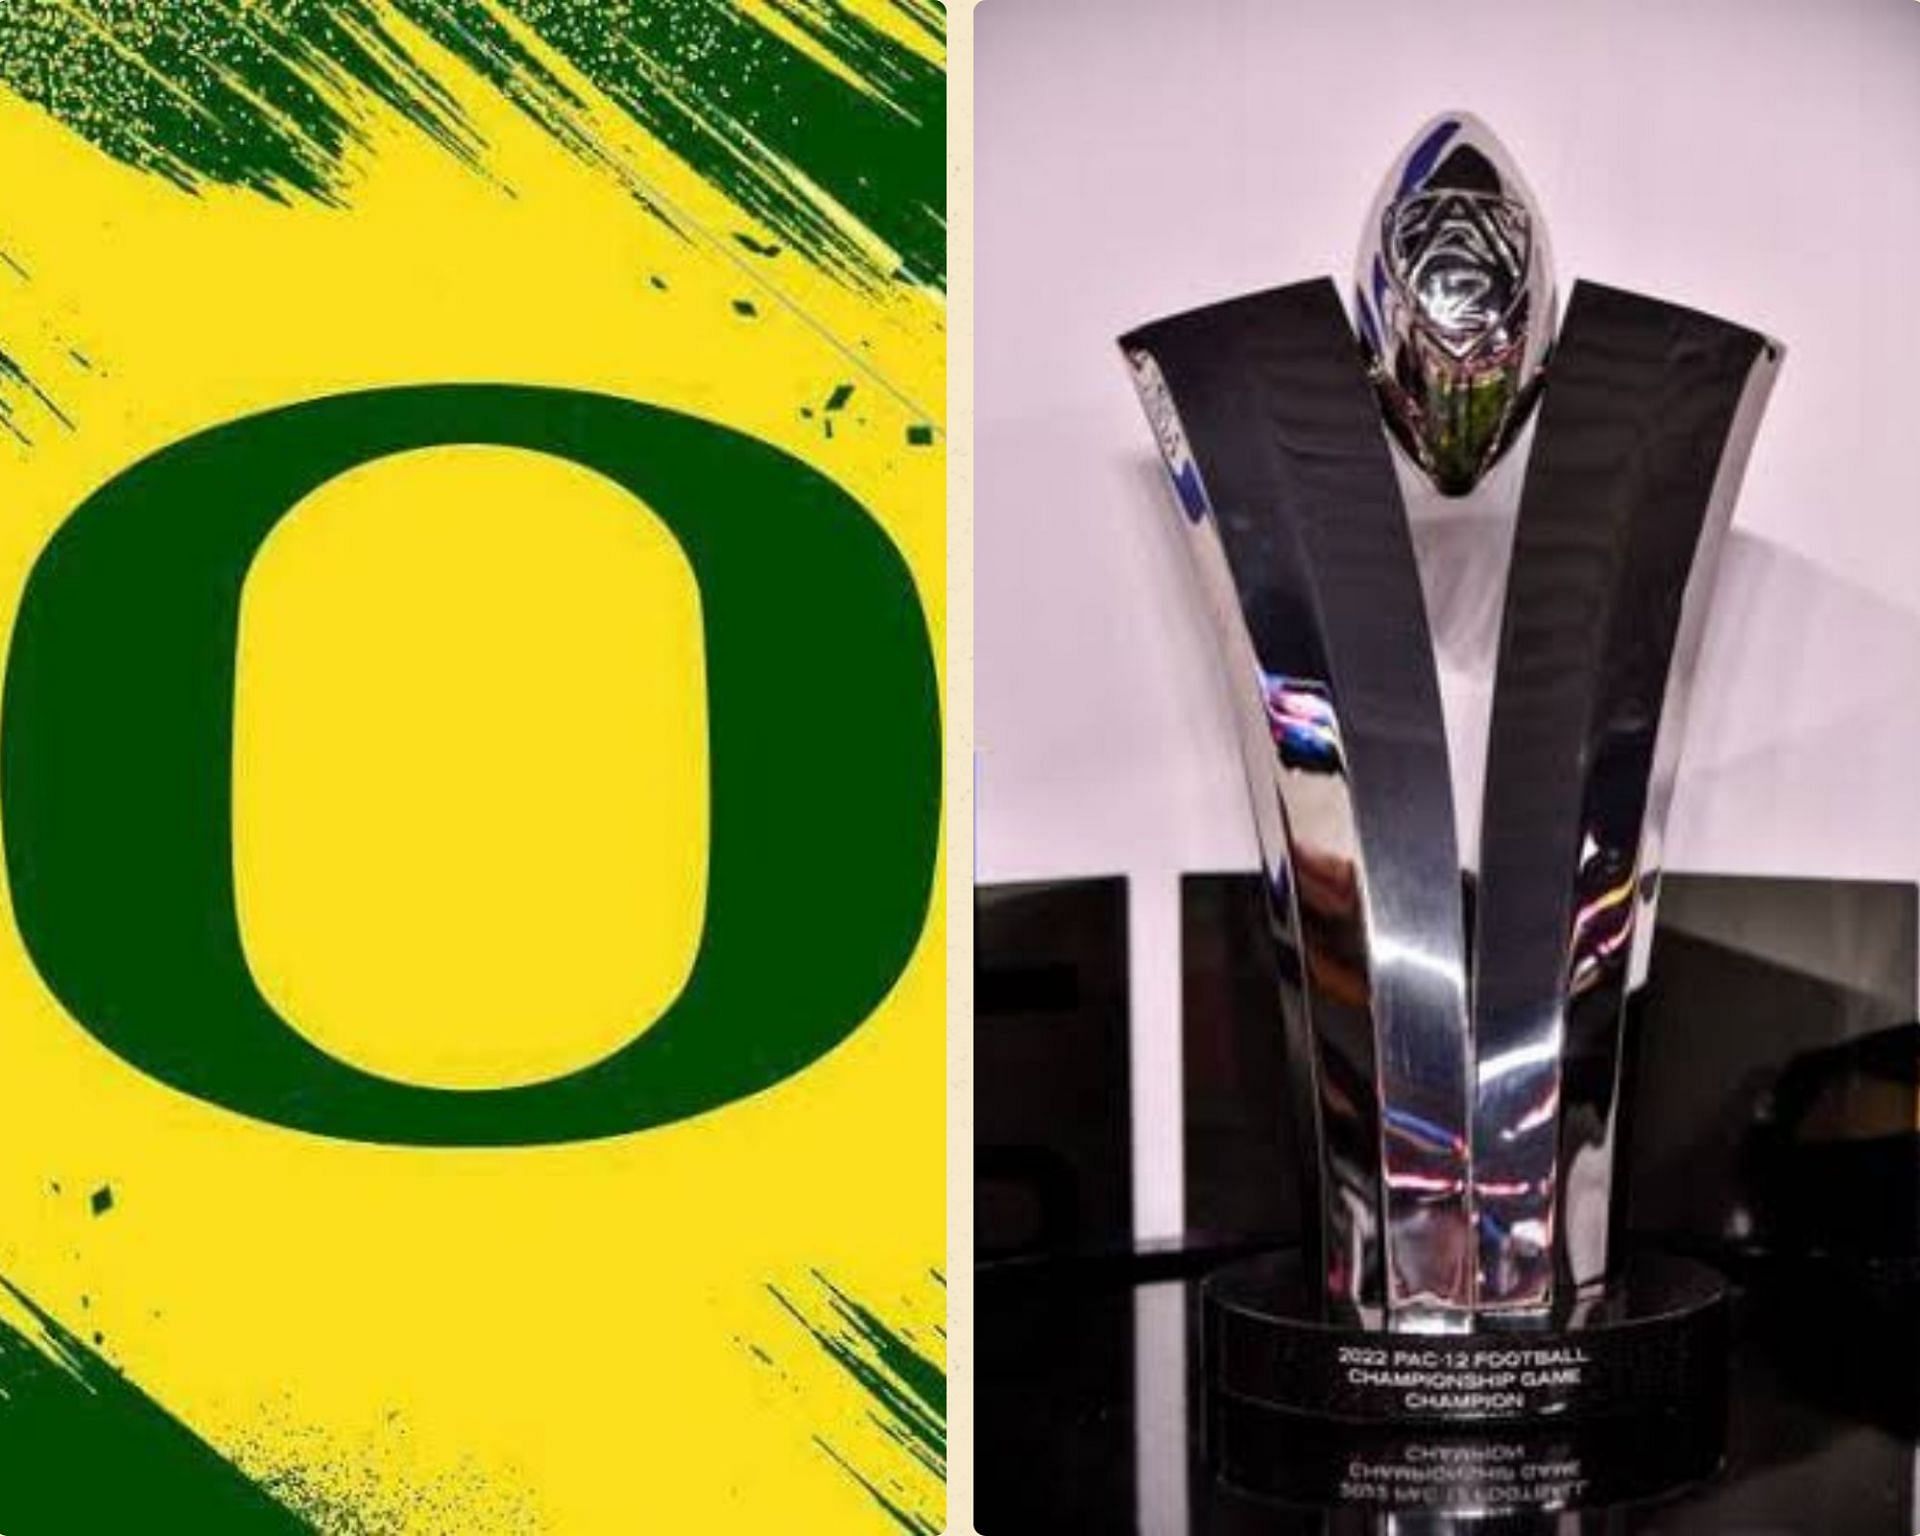 The Oregon Ducks have been predicted to win the Pac-12 Conference championship title